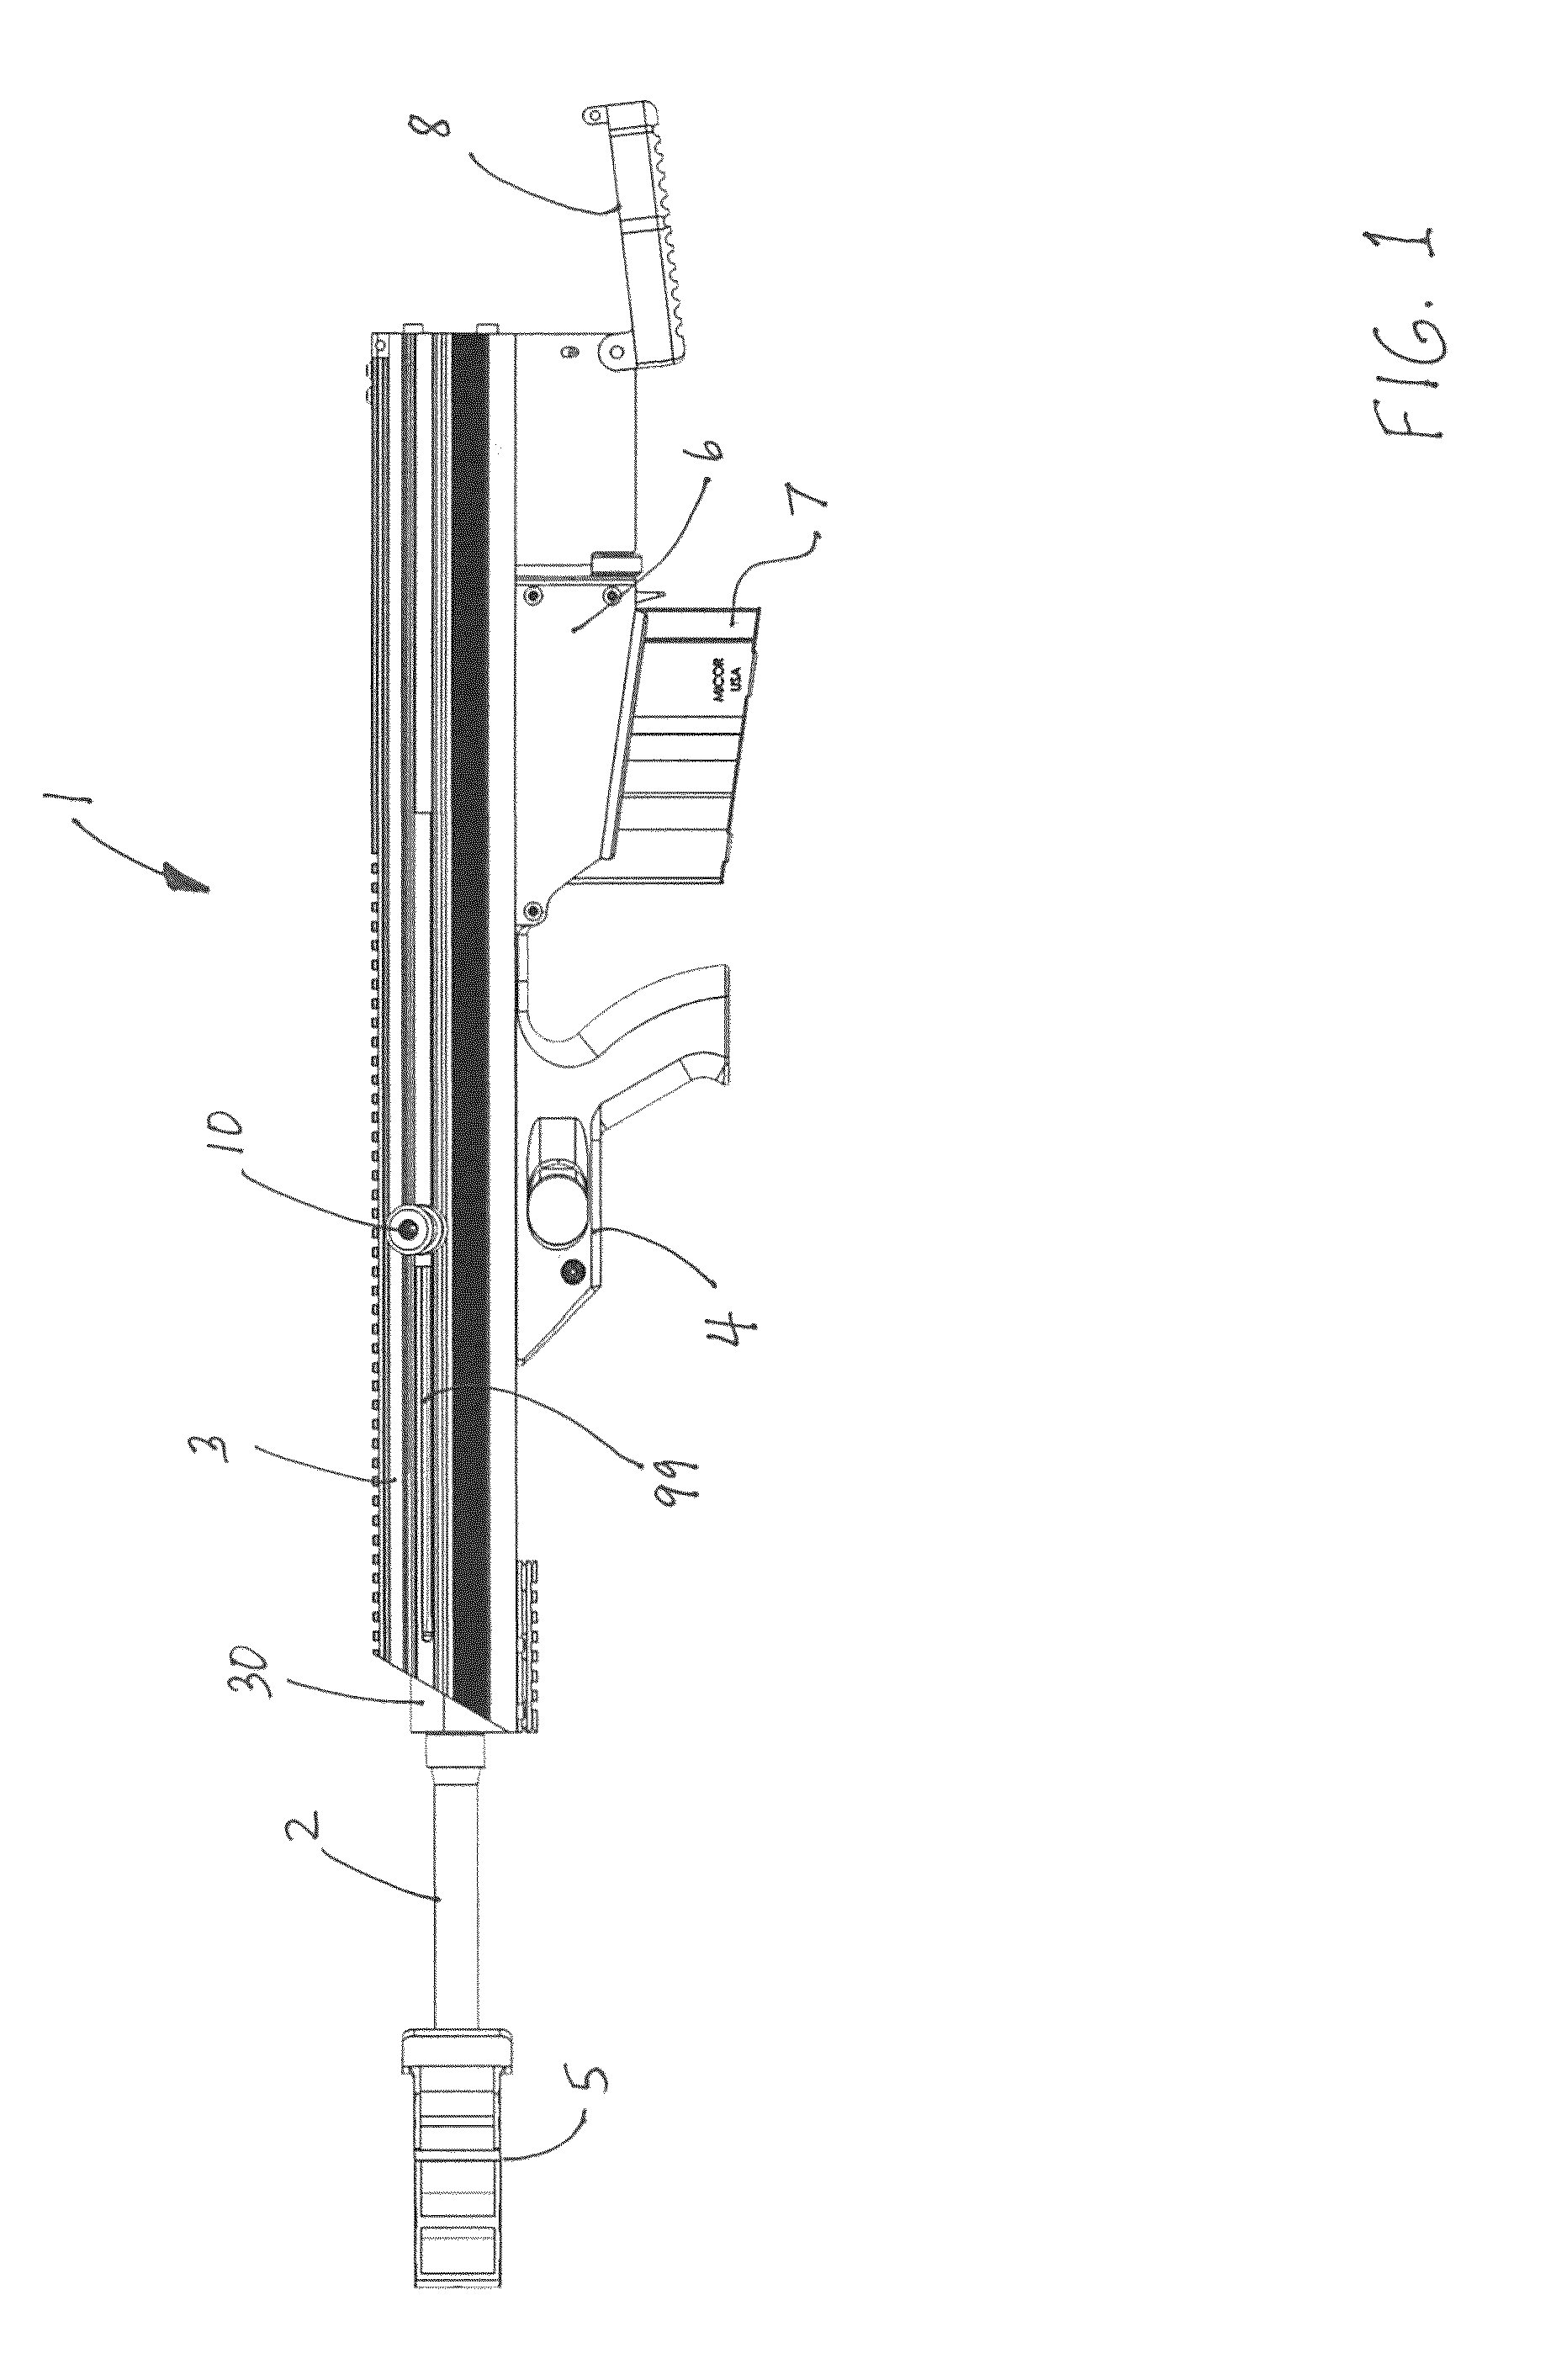 Firearm action and gas system